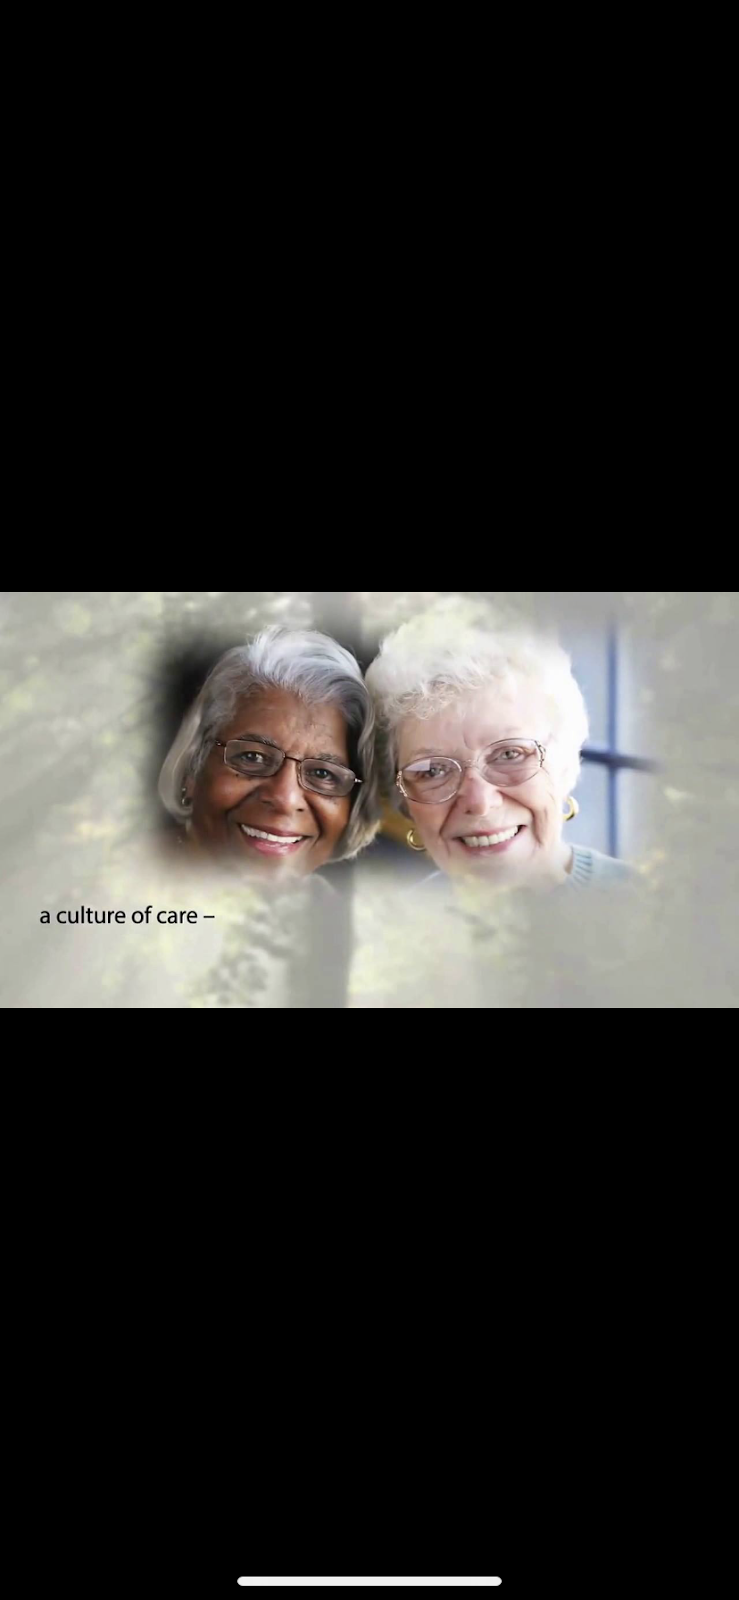 Live Better Homecare LLC | 25200 Rockside Rd, Bedford Heights, OH 44146, USA | Phone: (440) 903-6533